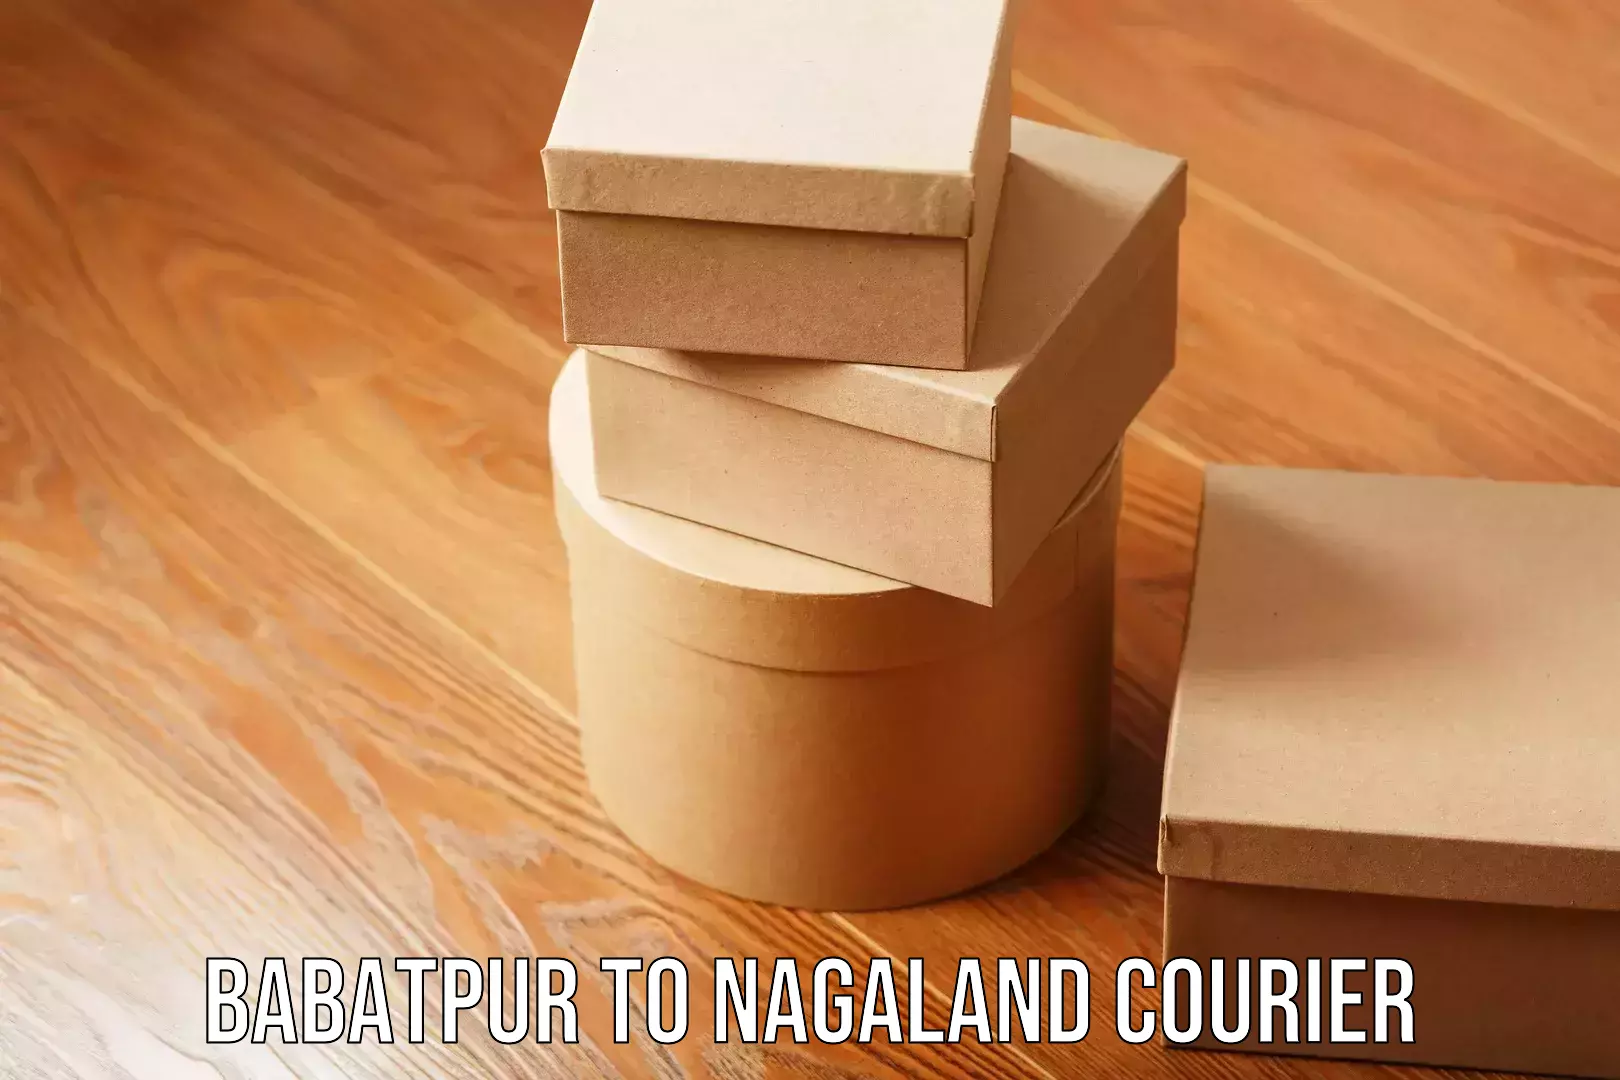 End-to-end delivery Babatpur to Nagaland